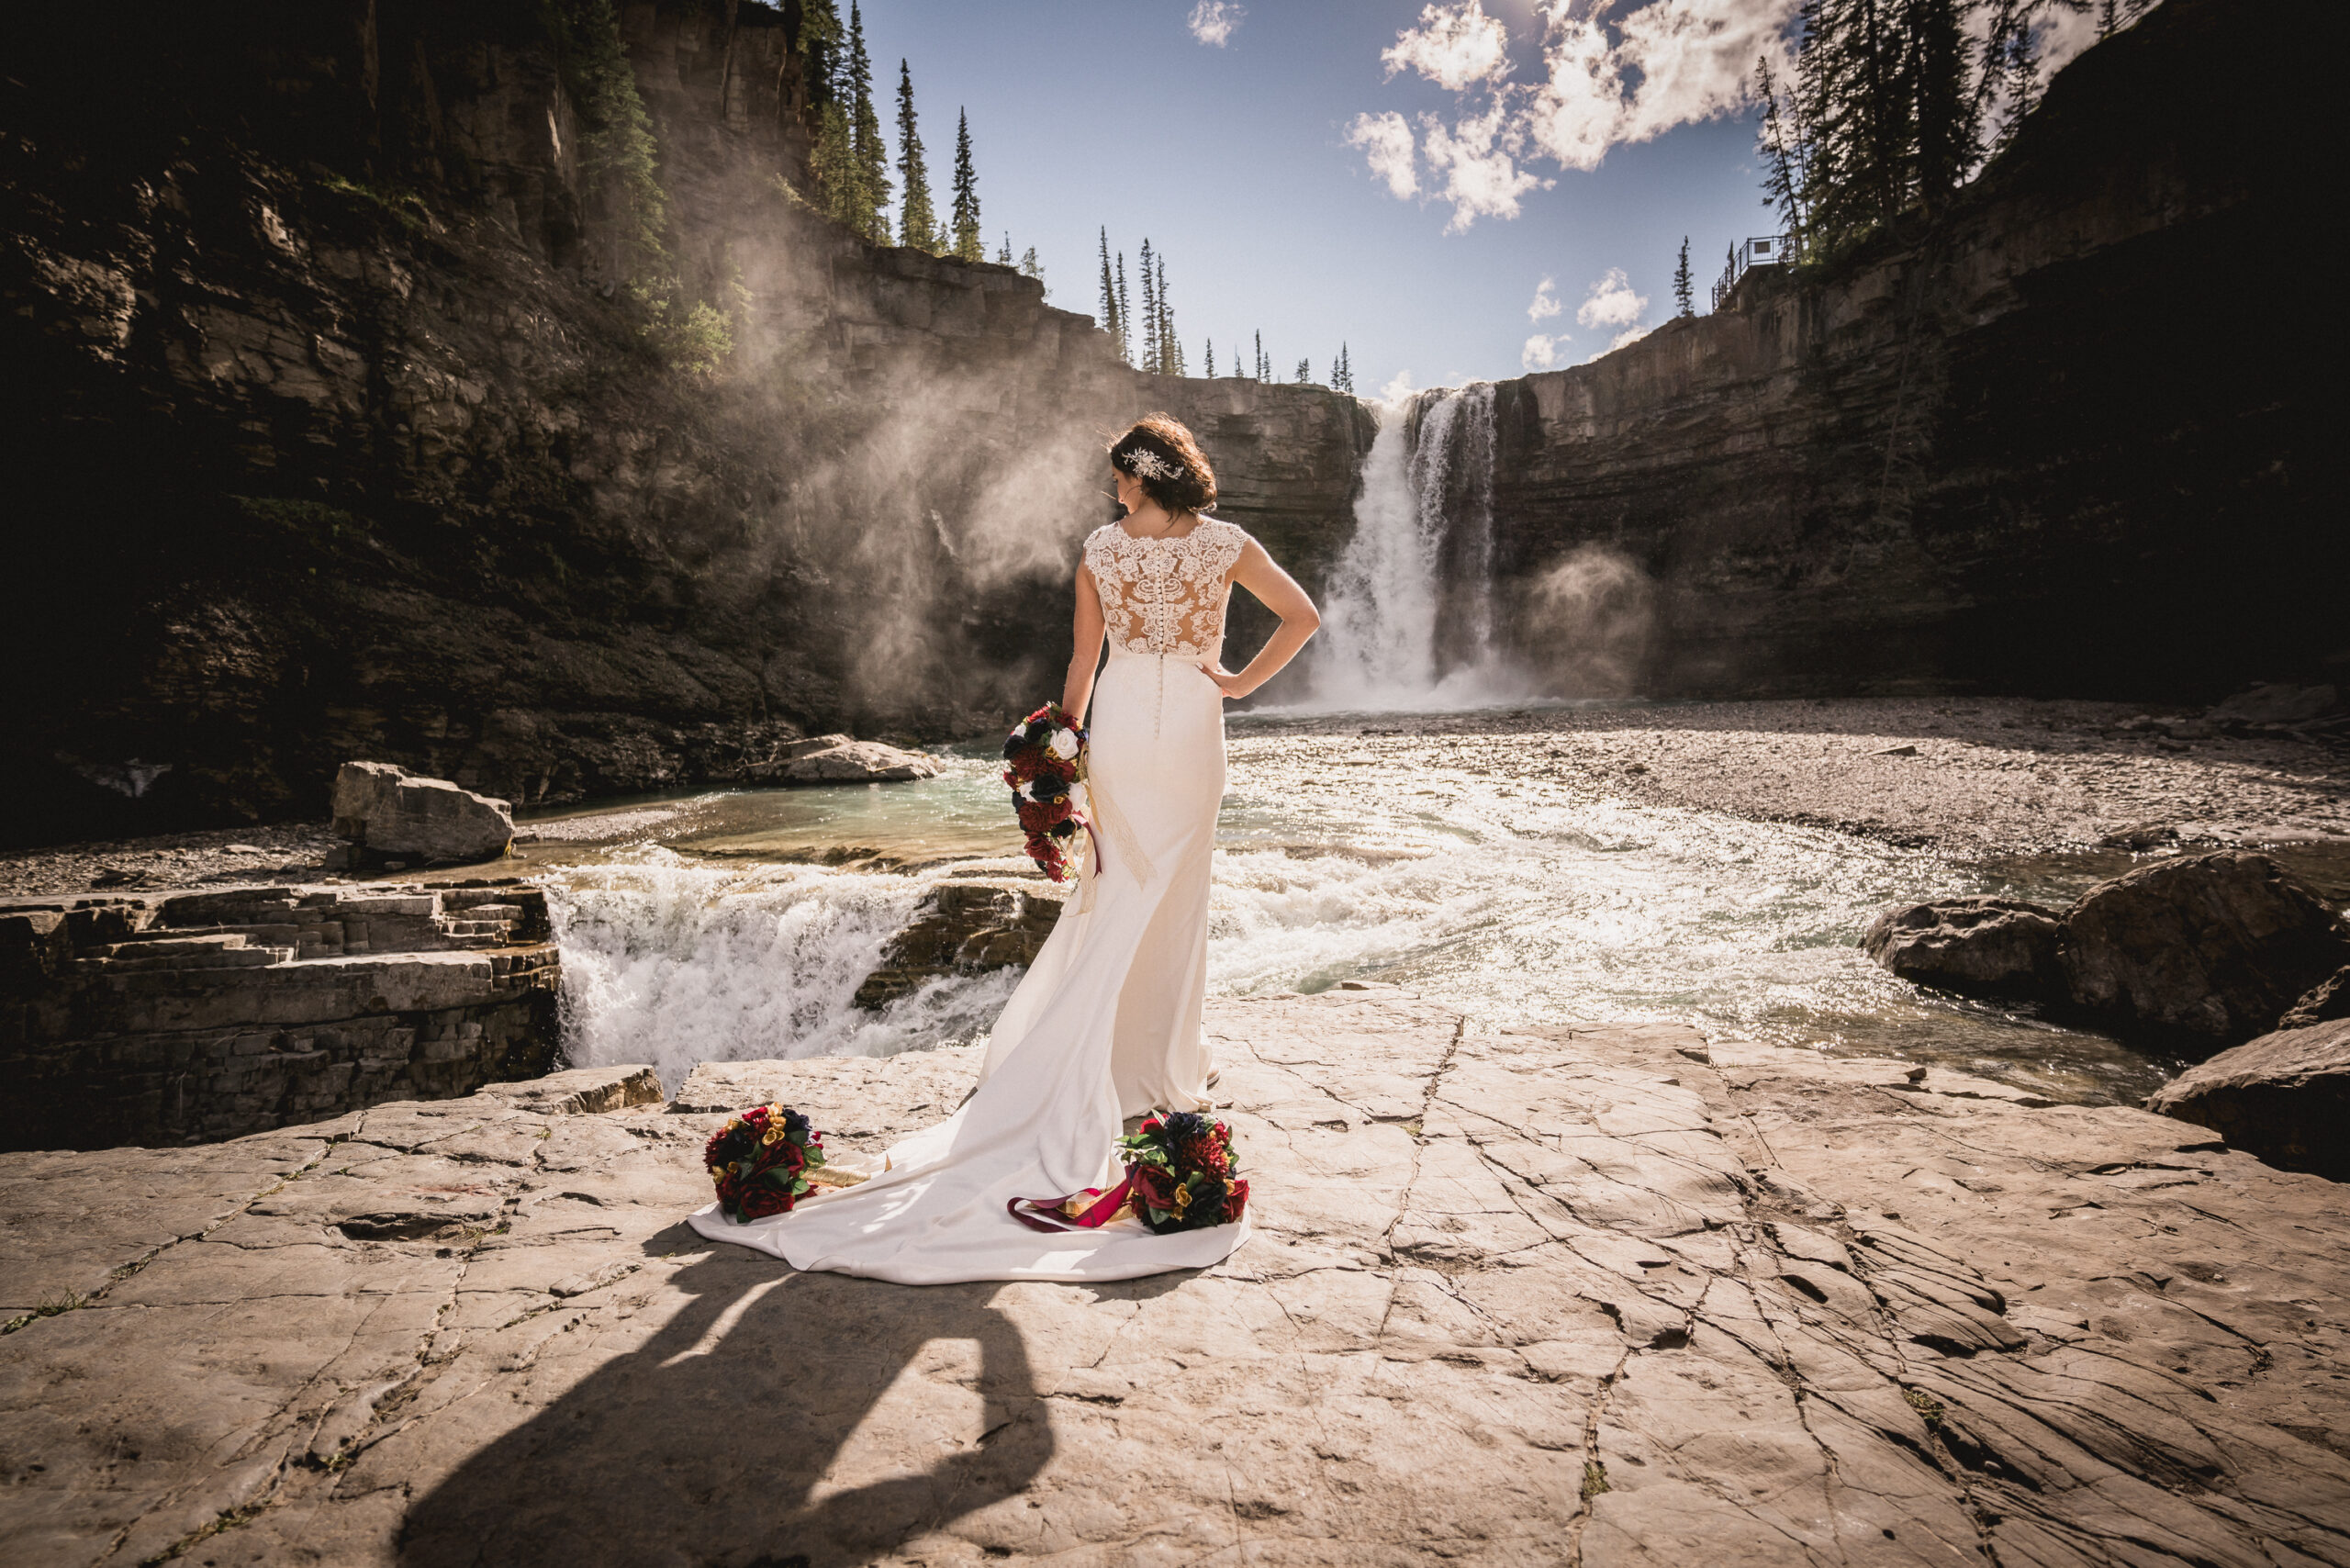 Bride with classic gown with long train, looking over her should in front of waterfall